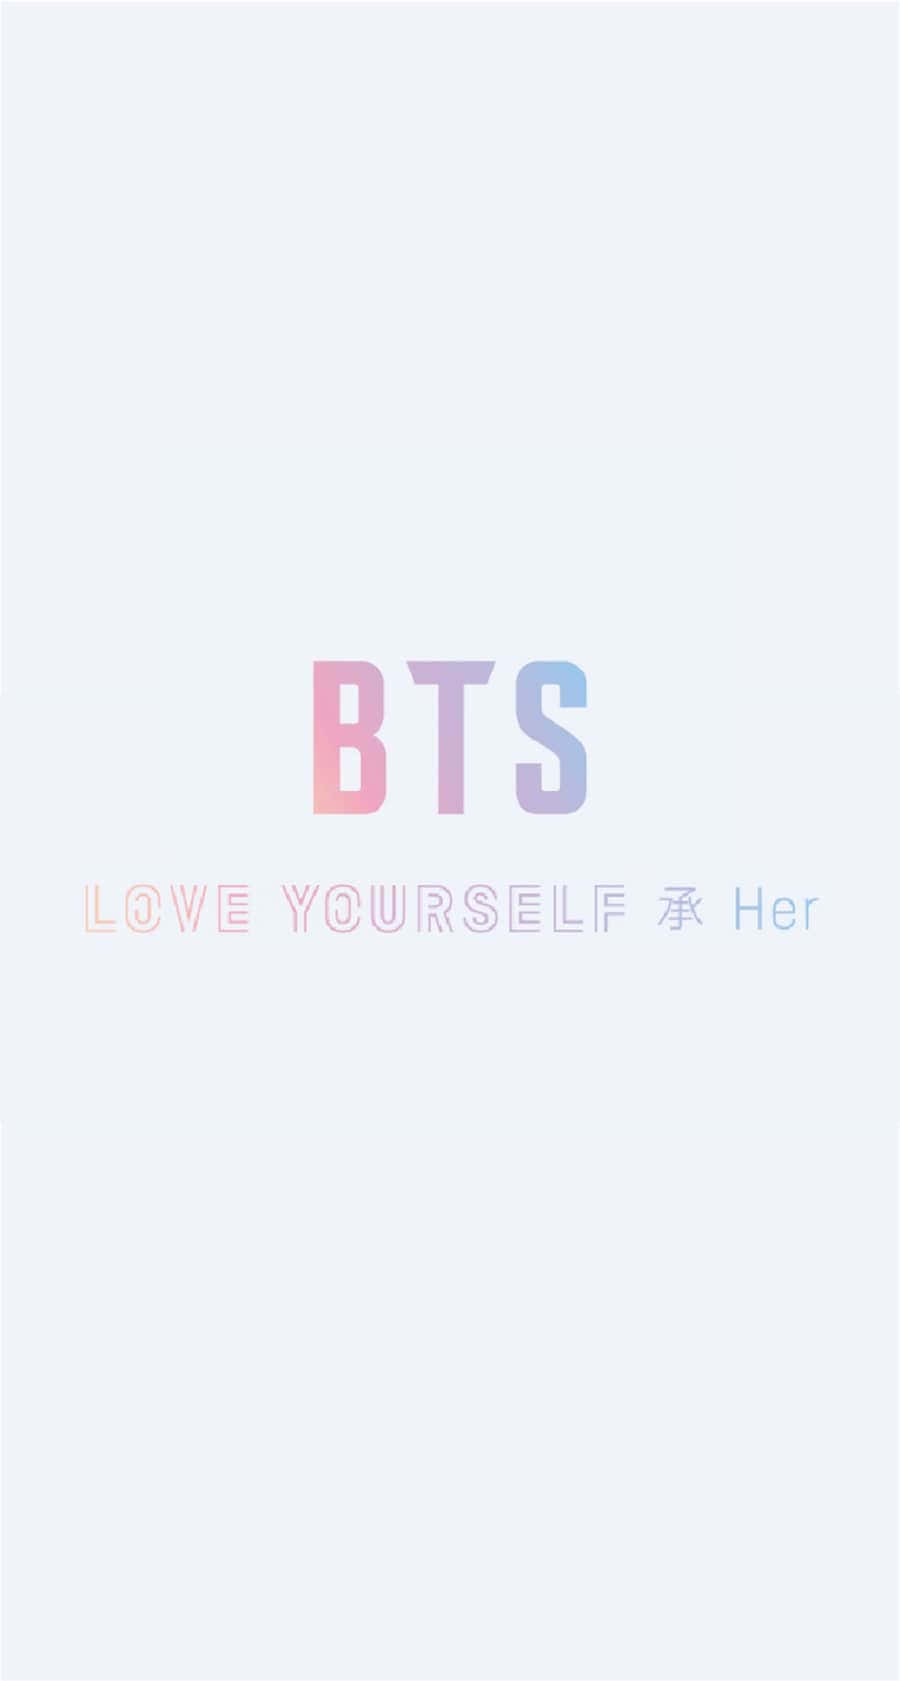 BTS Love Yourself - Positivity and Artistry on Display Wallpaper